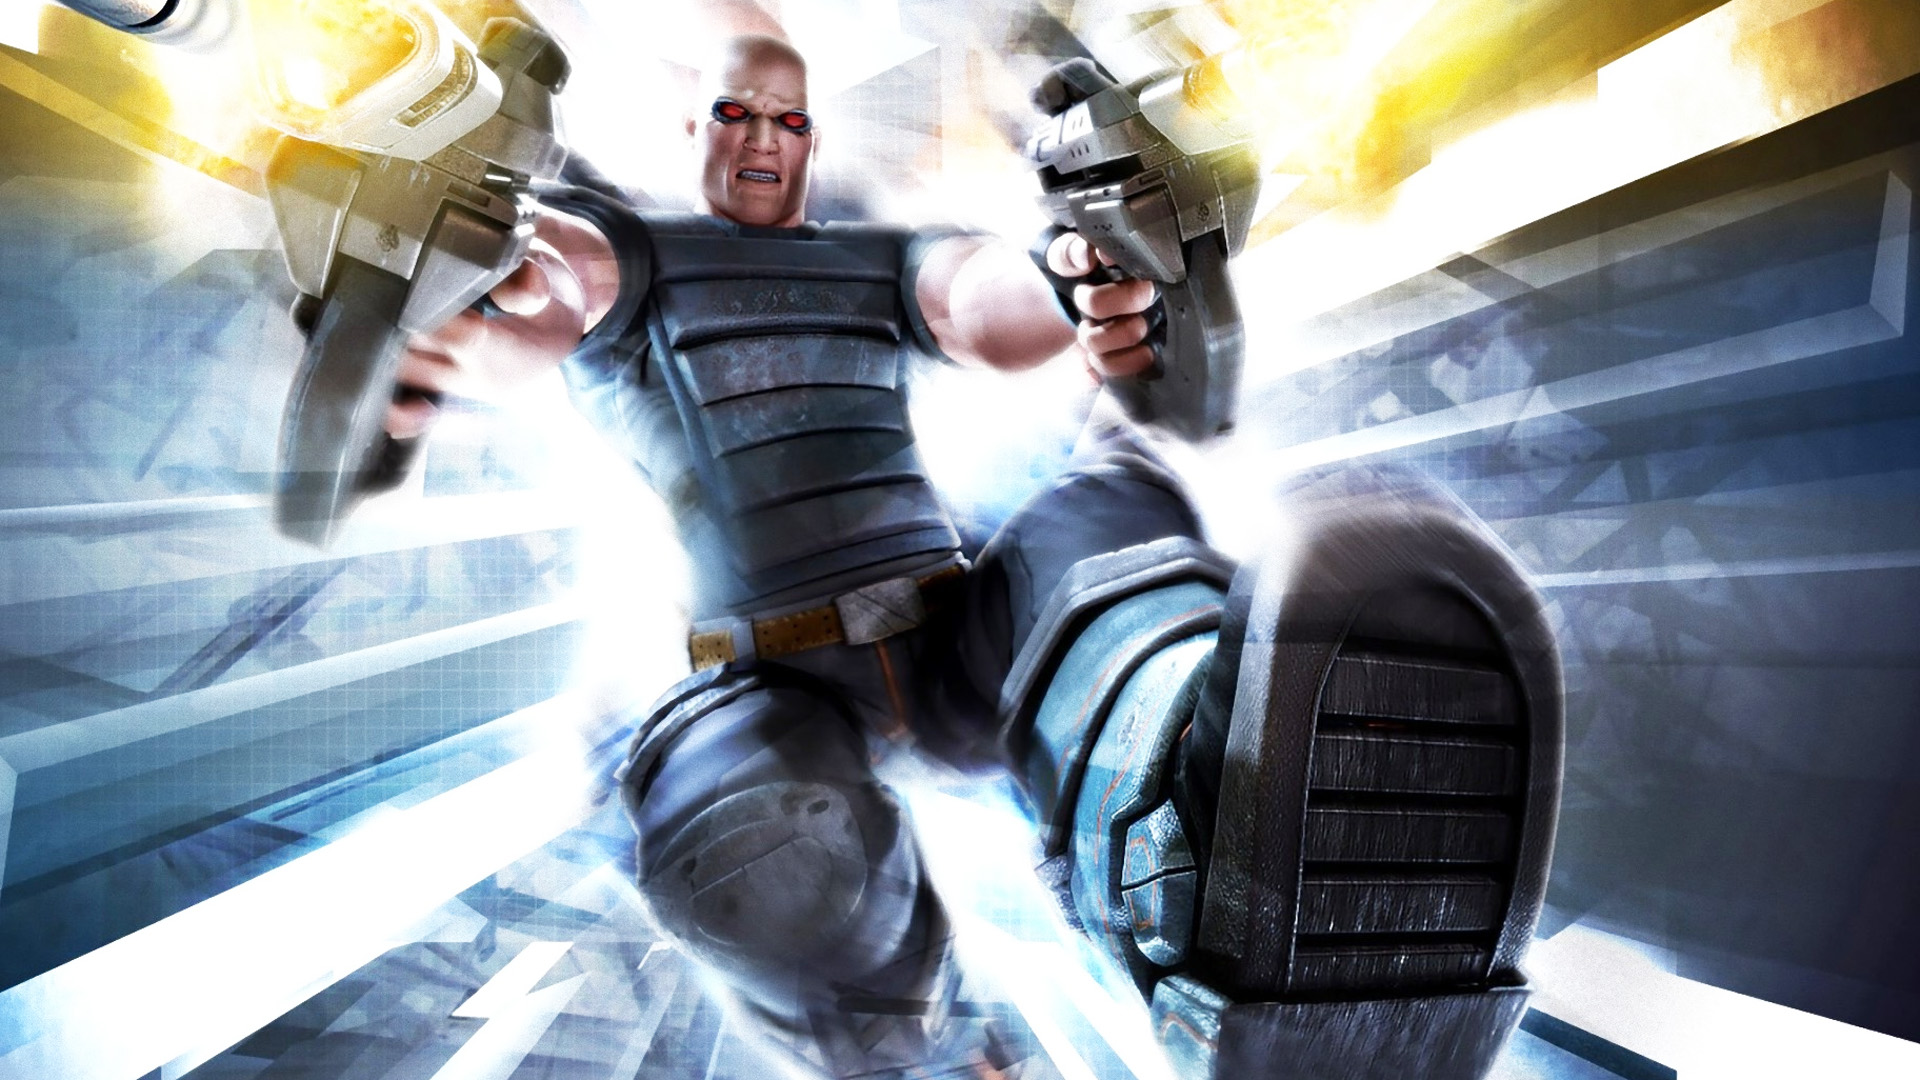 The canceled TimeSplitters reboot keeps looking better and better